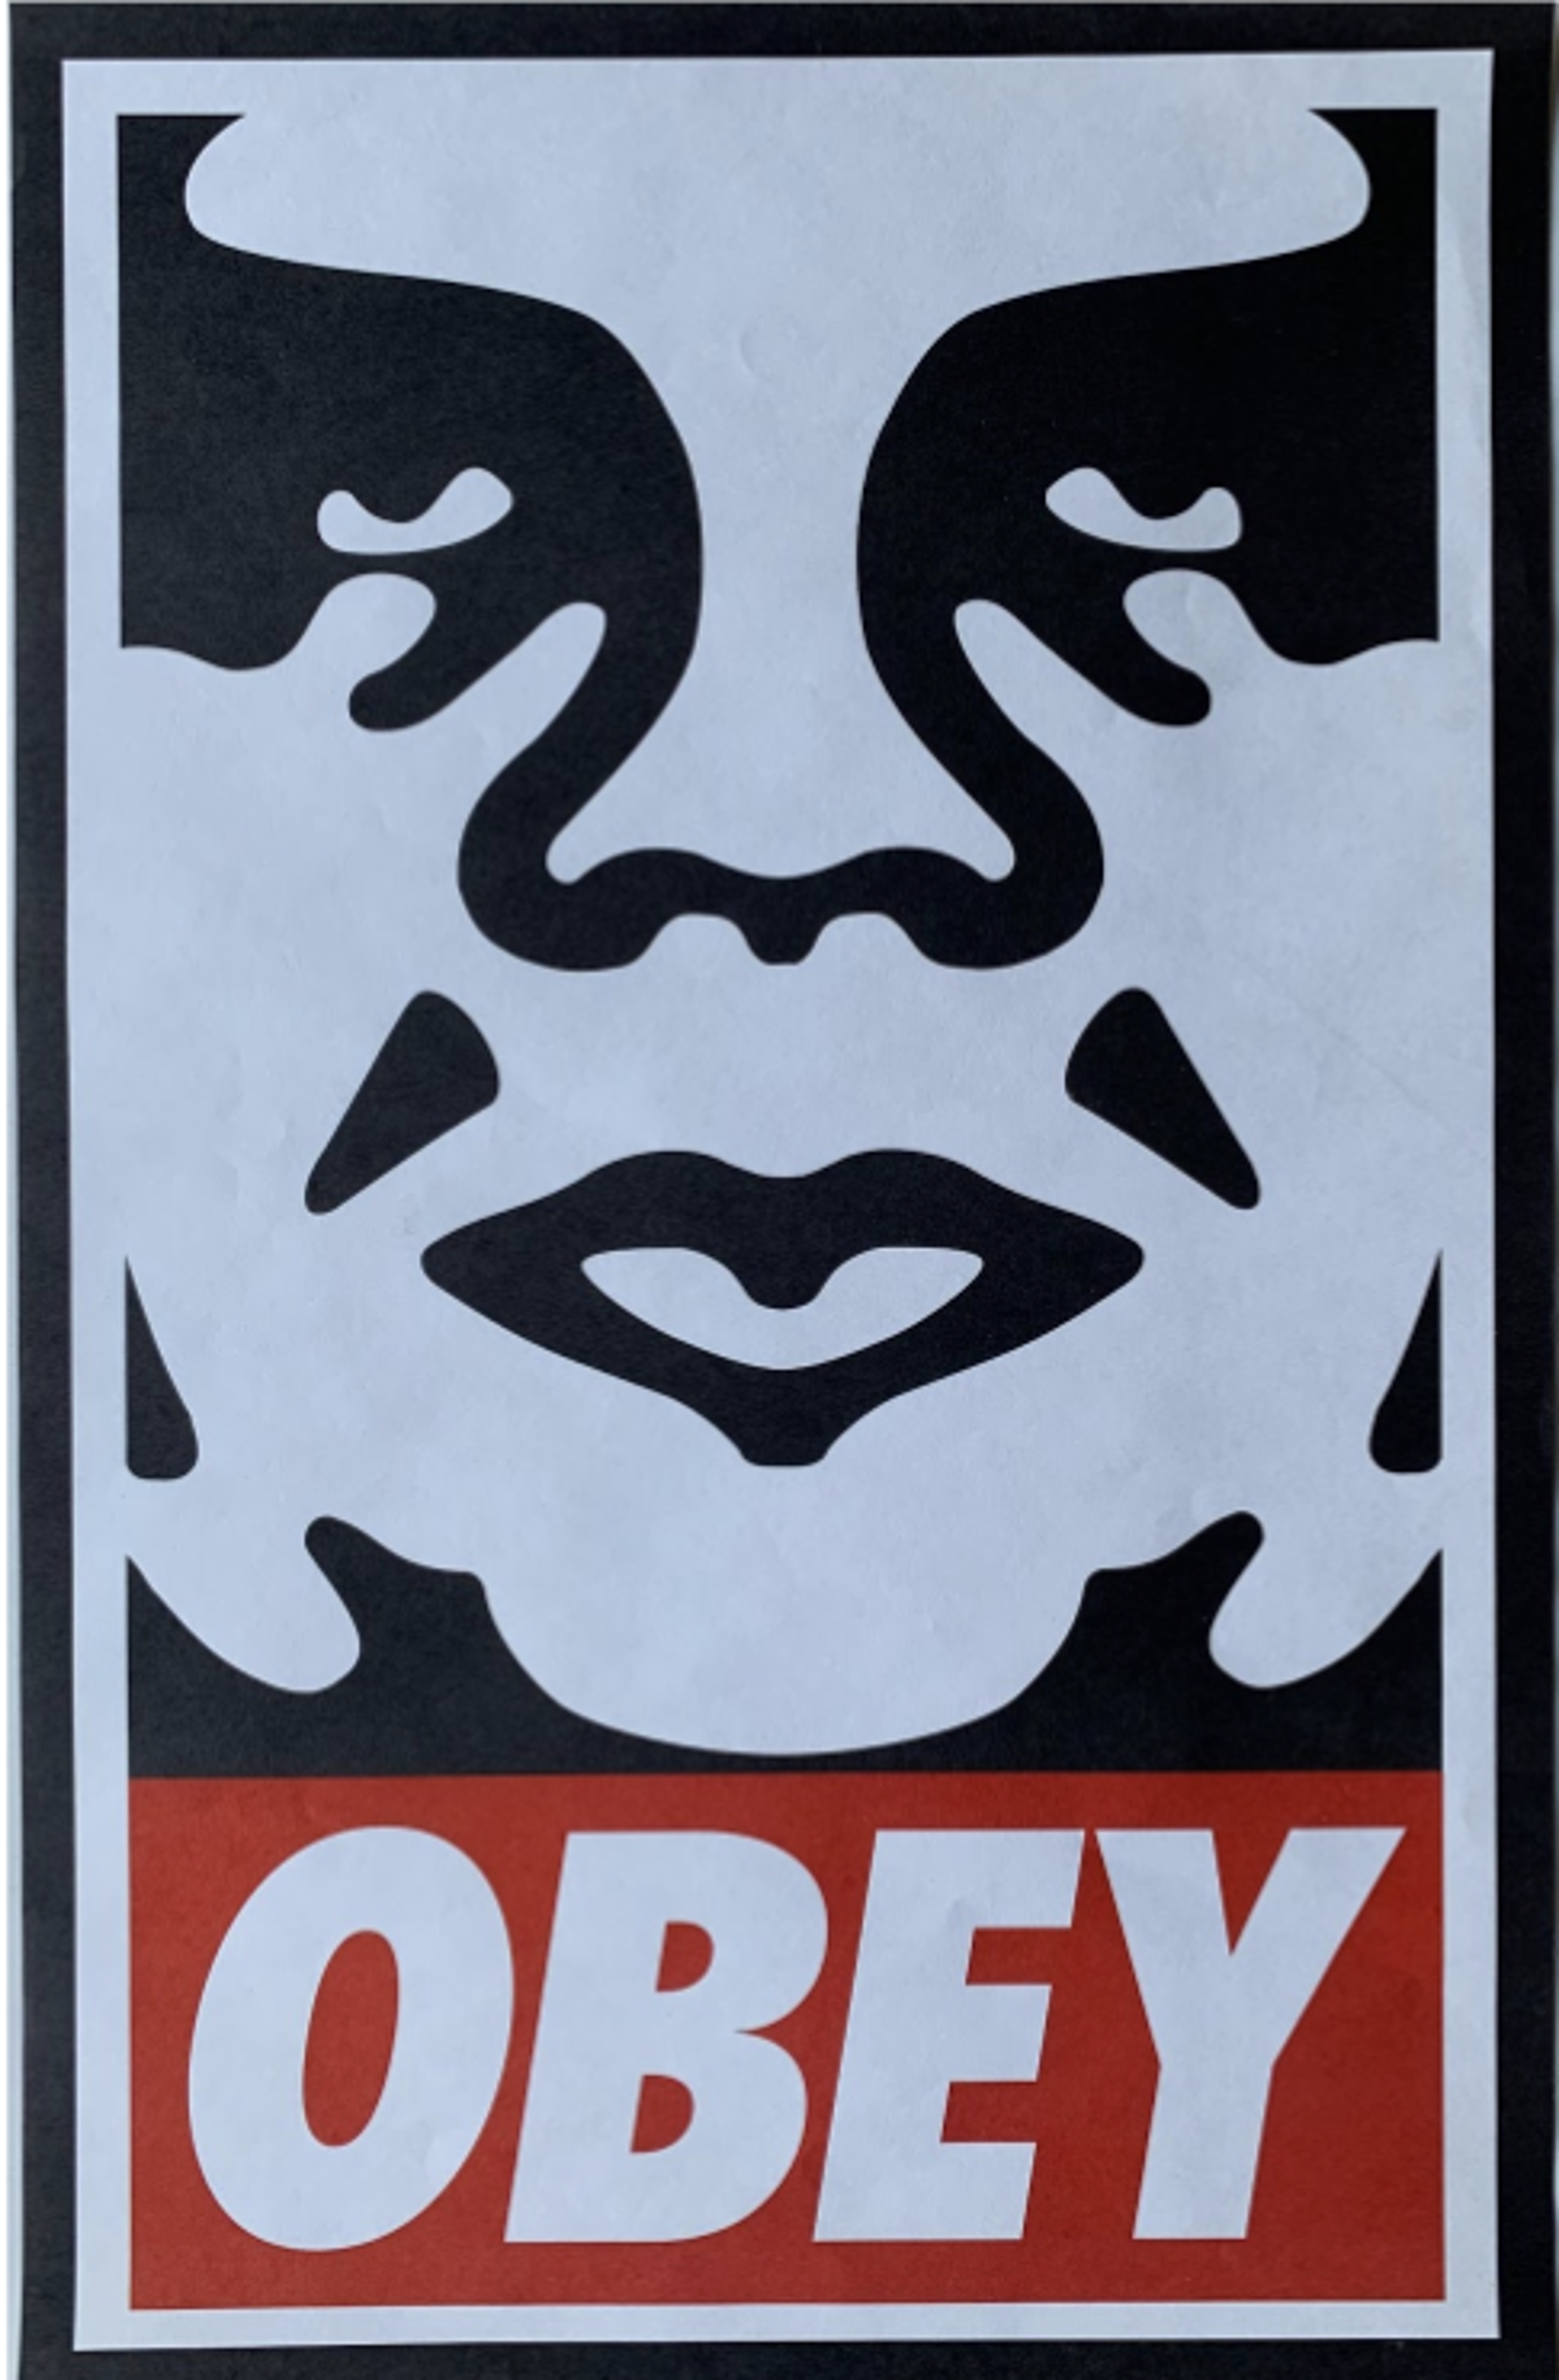 Obey Giant by Shepard Fairey